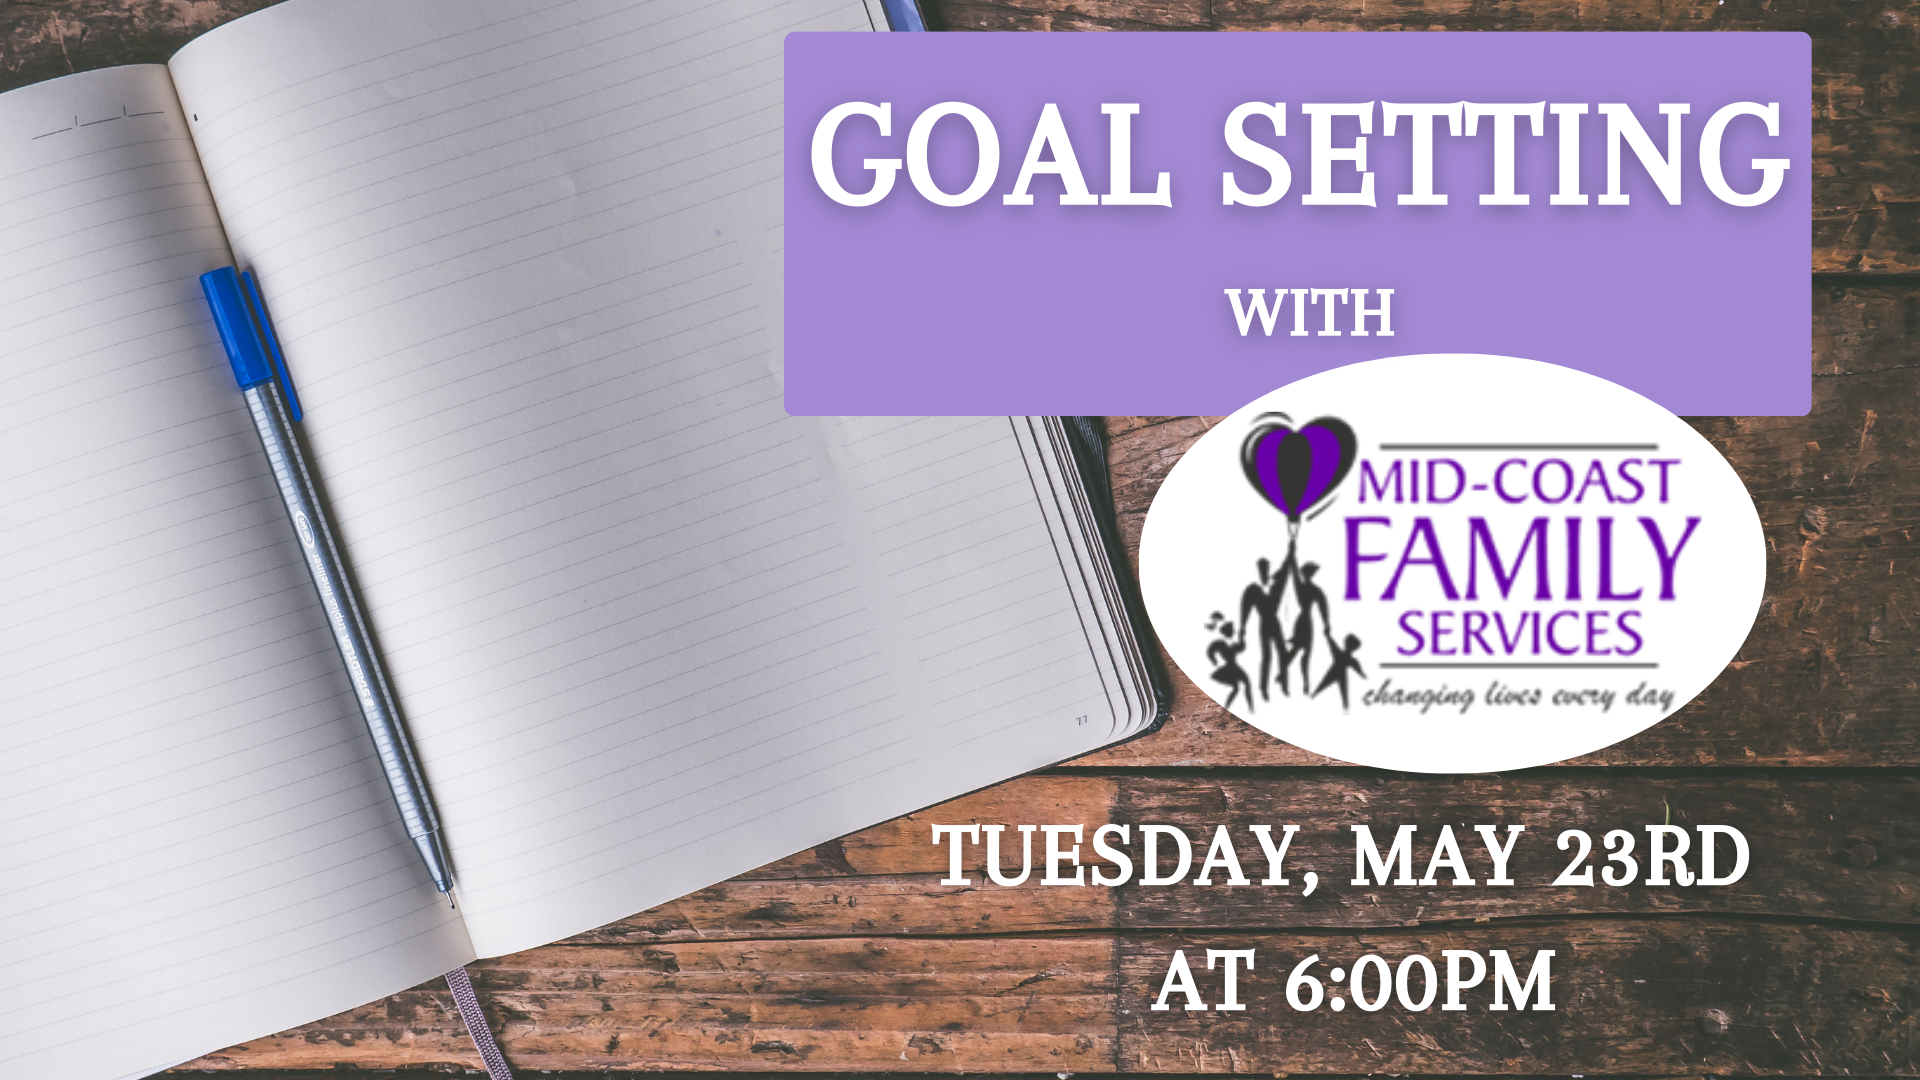 Goal setting with Midcoast Family Services, May 23rd at 6:00pm